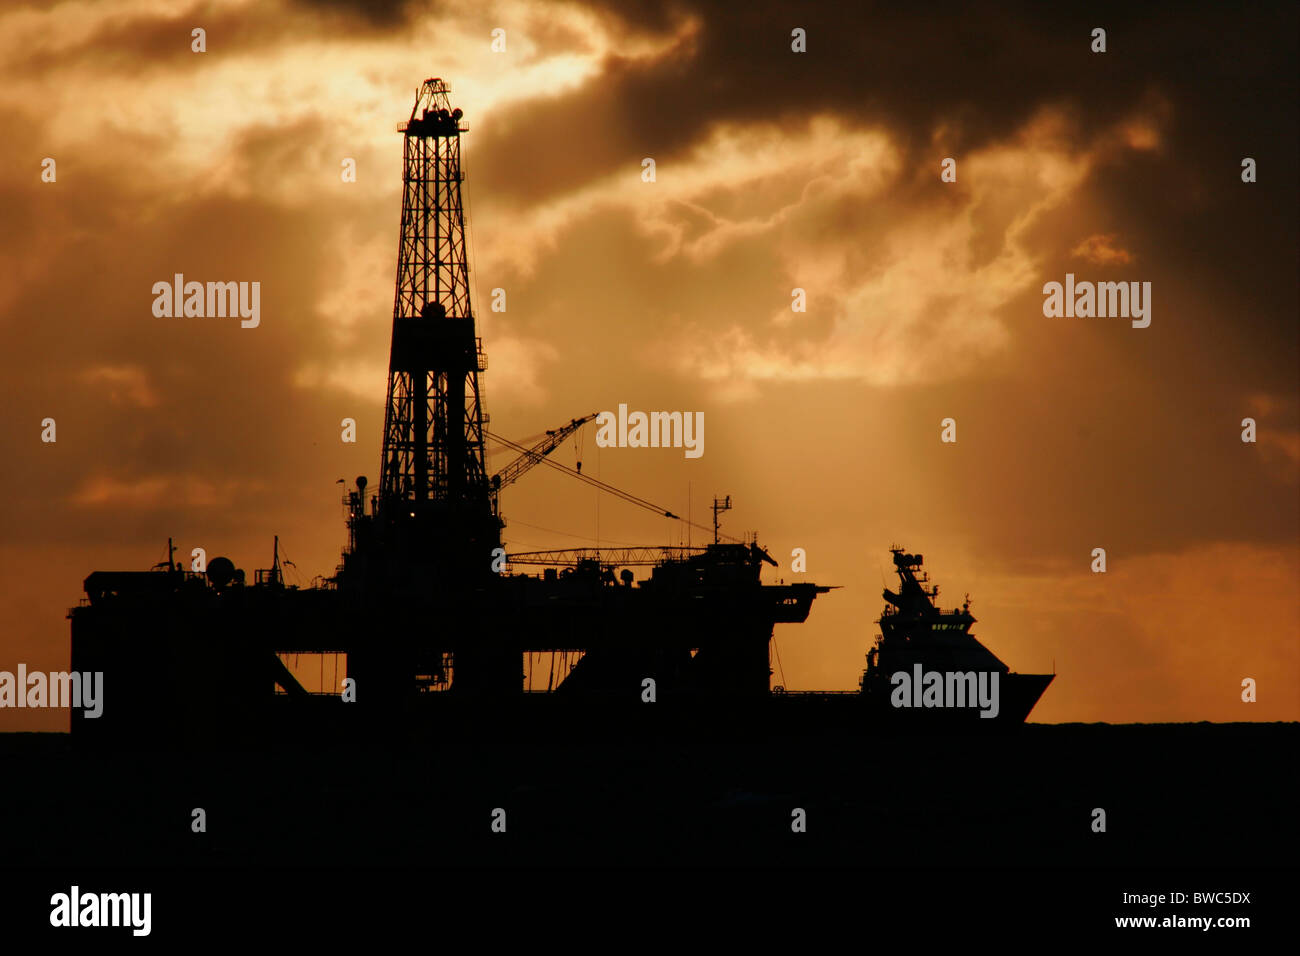 Silhouette of a supply vessel and oil rig in the North Sea, September 2006 Stock Photo